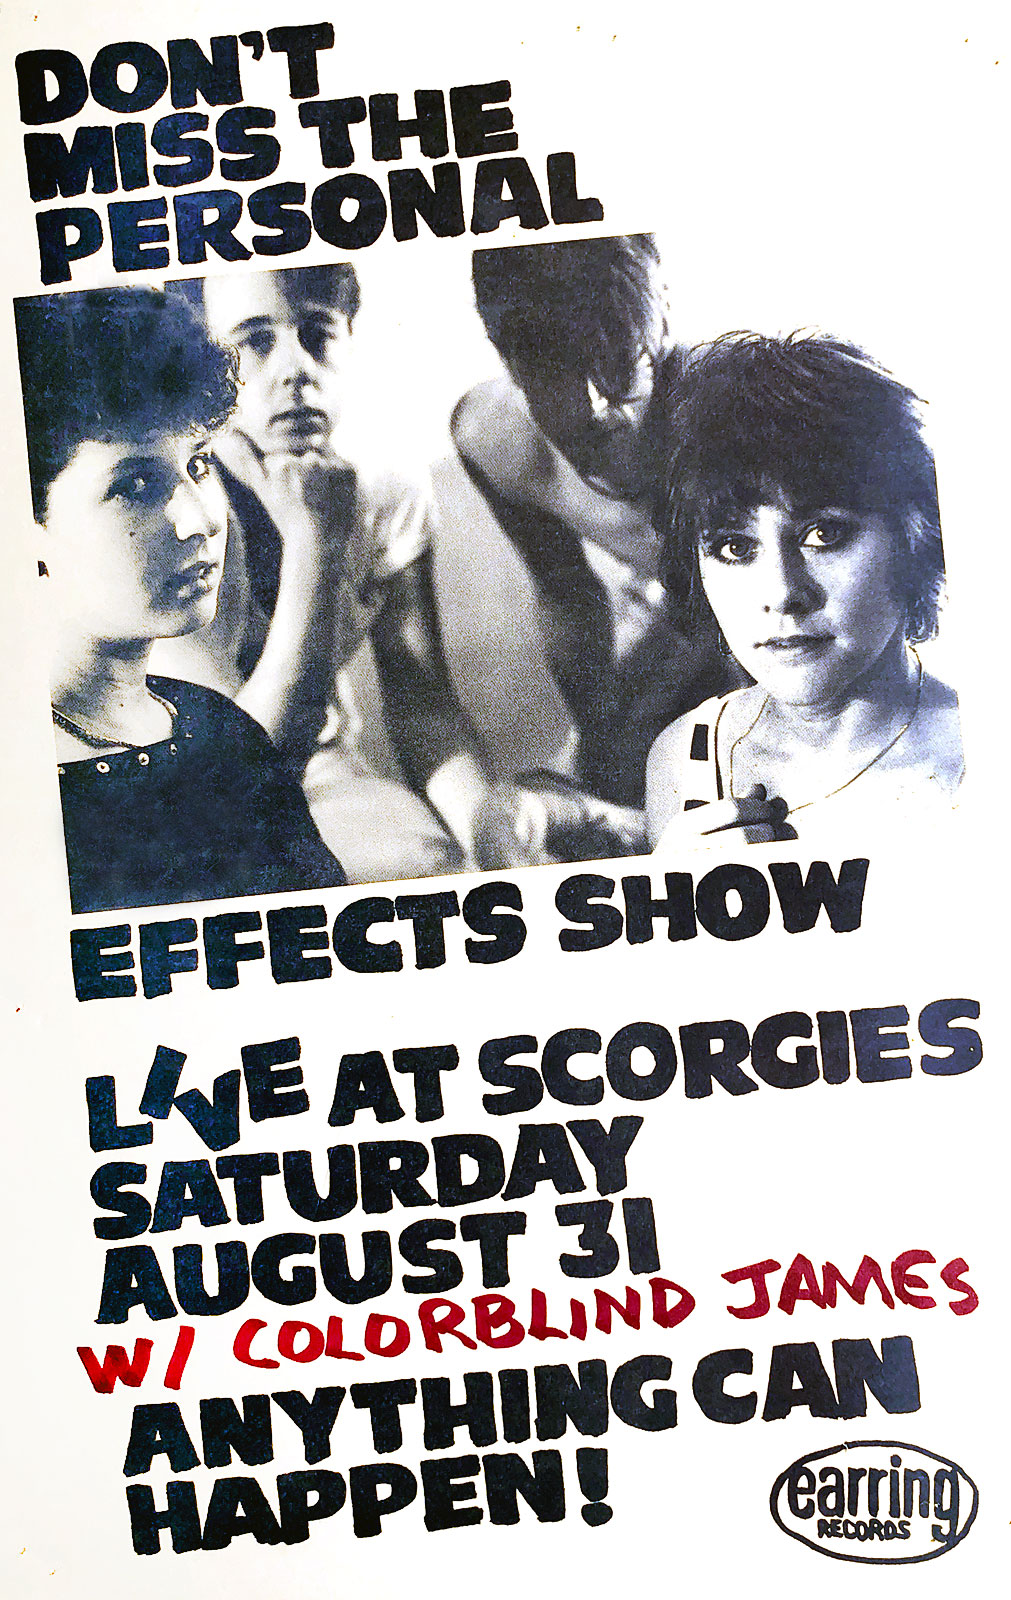 Poster for Personal Effects with Colorblind James Experience at Scorgie's in Rochester, New York on 08.31.1985. Colorblind James must have been a late addition to the bill as I wrote their name on each poster.